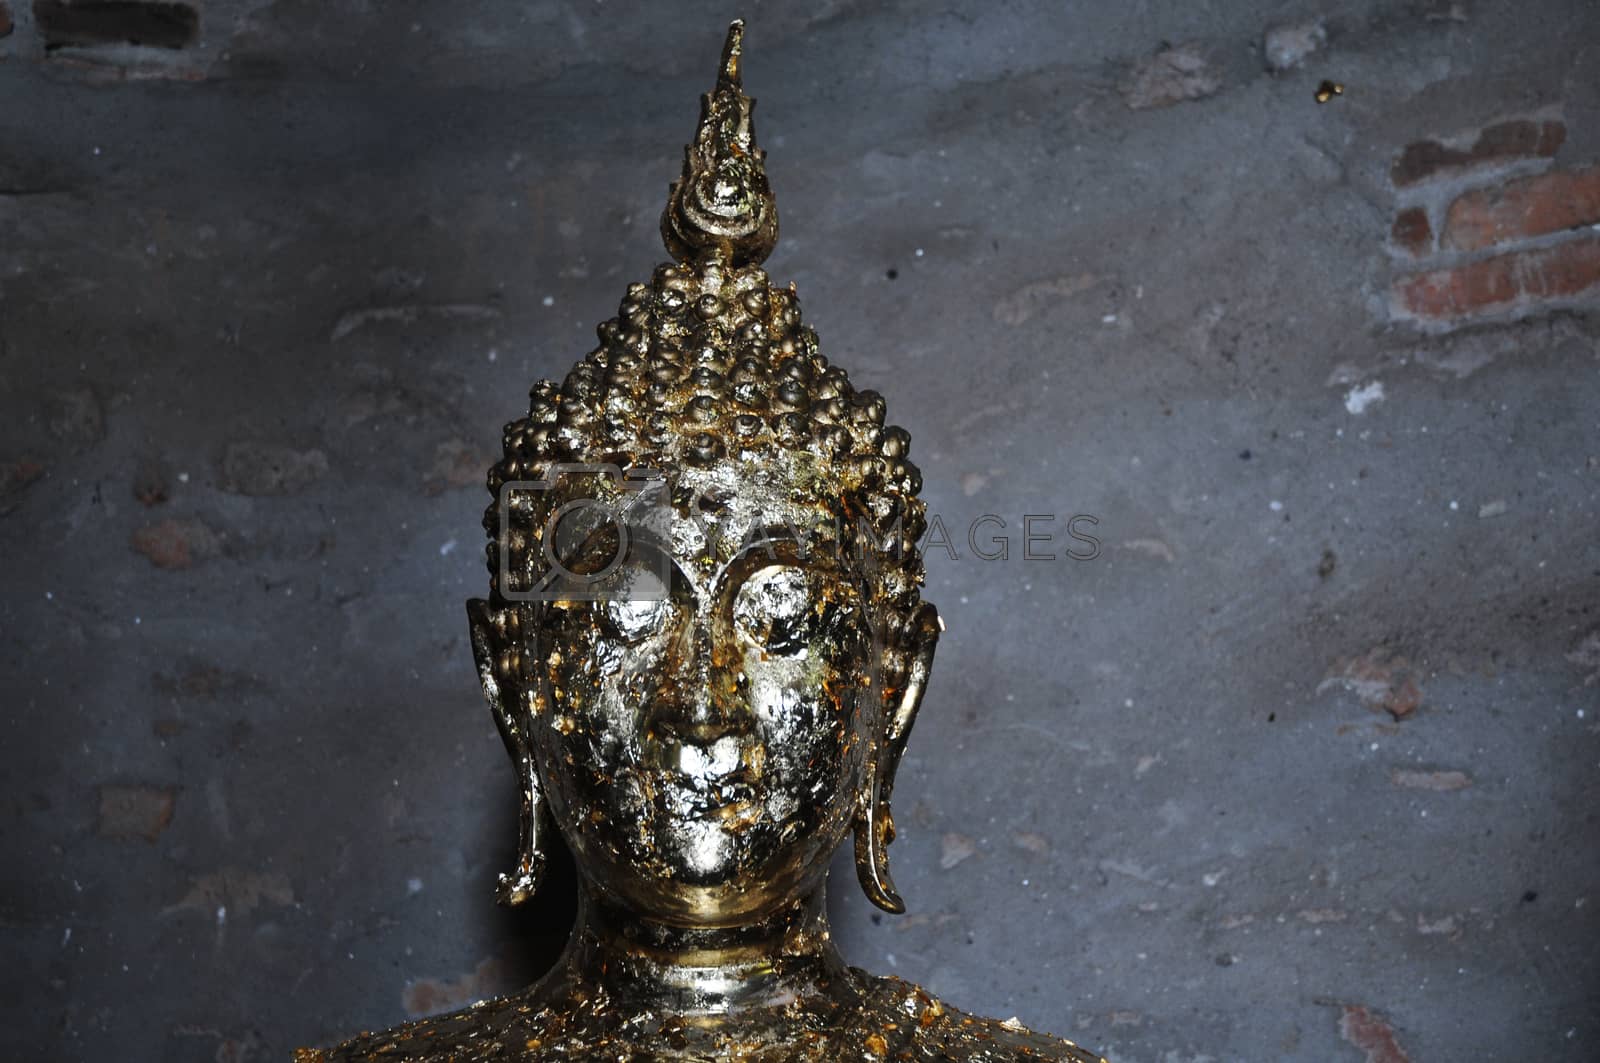 Royalty free image of Golden Buddha statue face by eyeofpaul